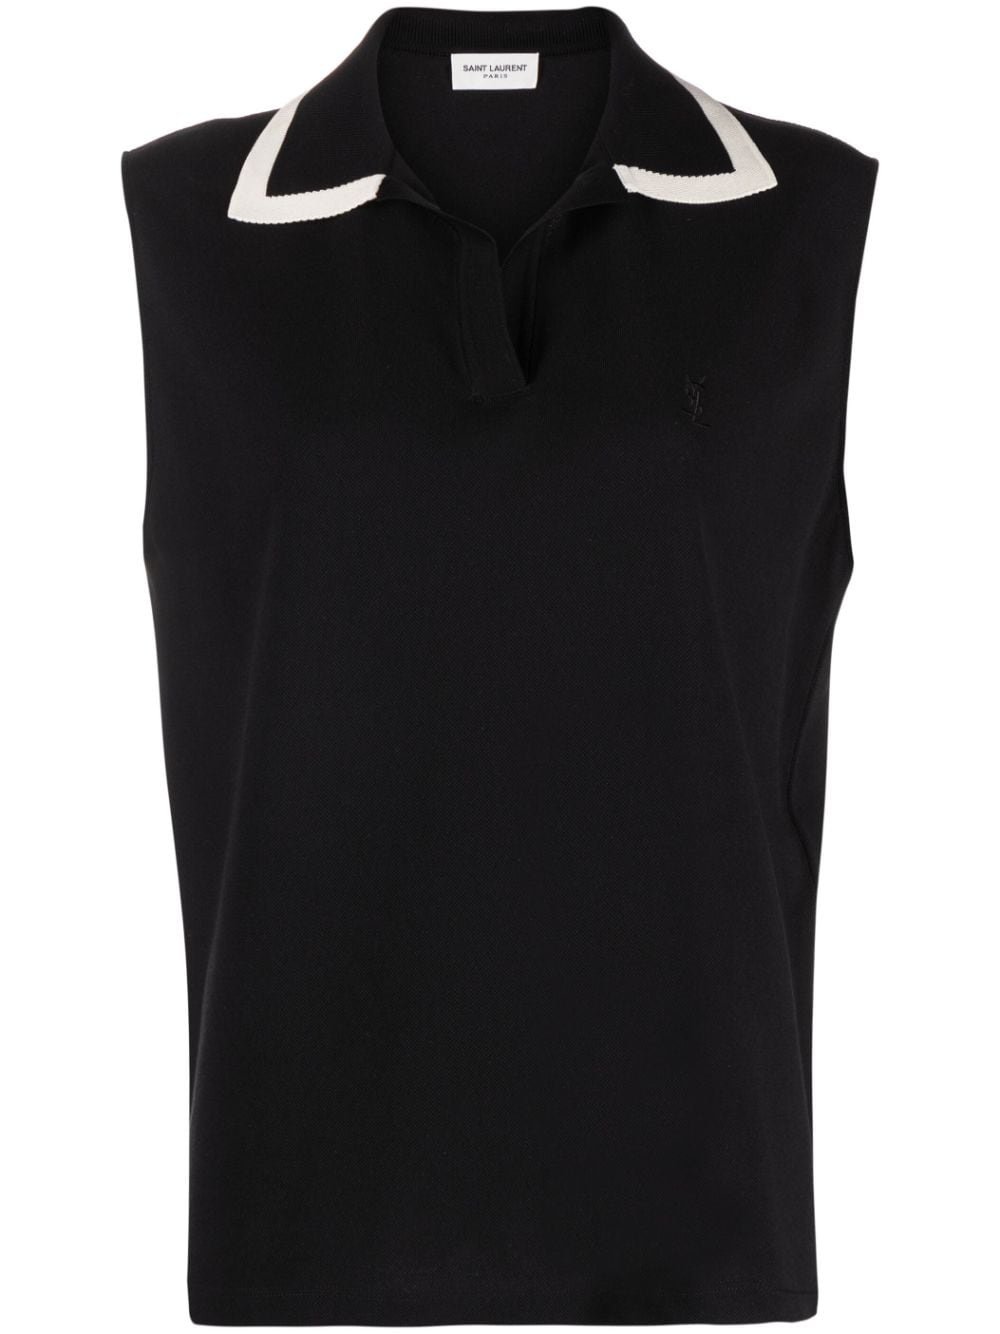 logo-embroidered sleeveless top - 1